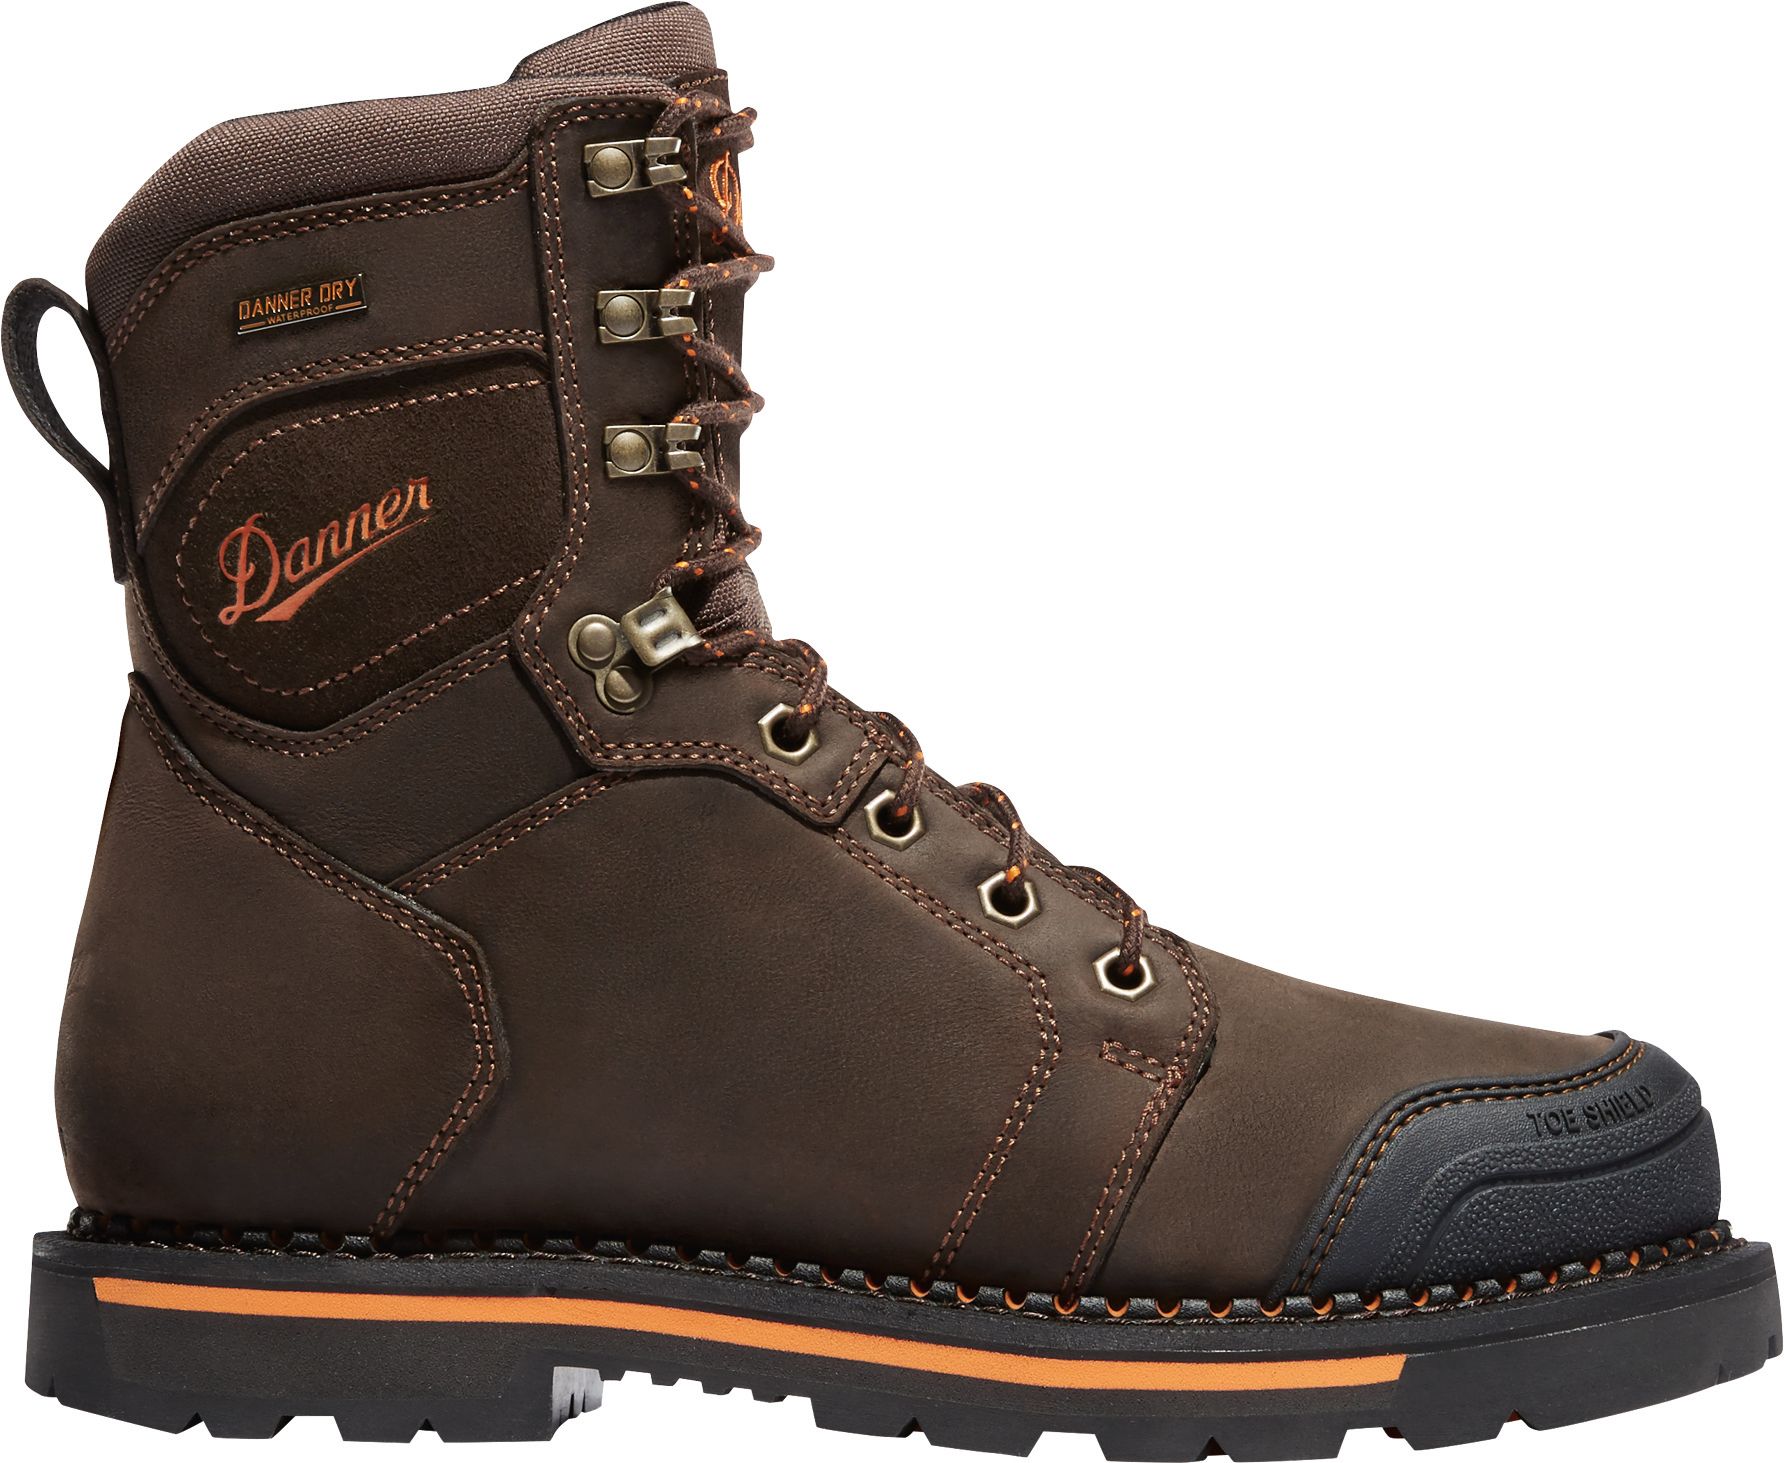 danner safety shoes